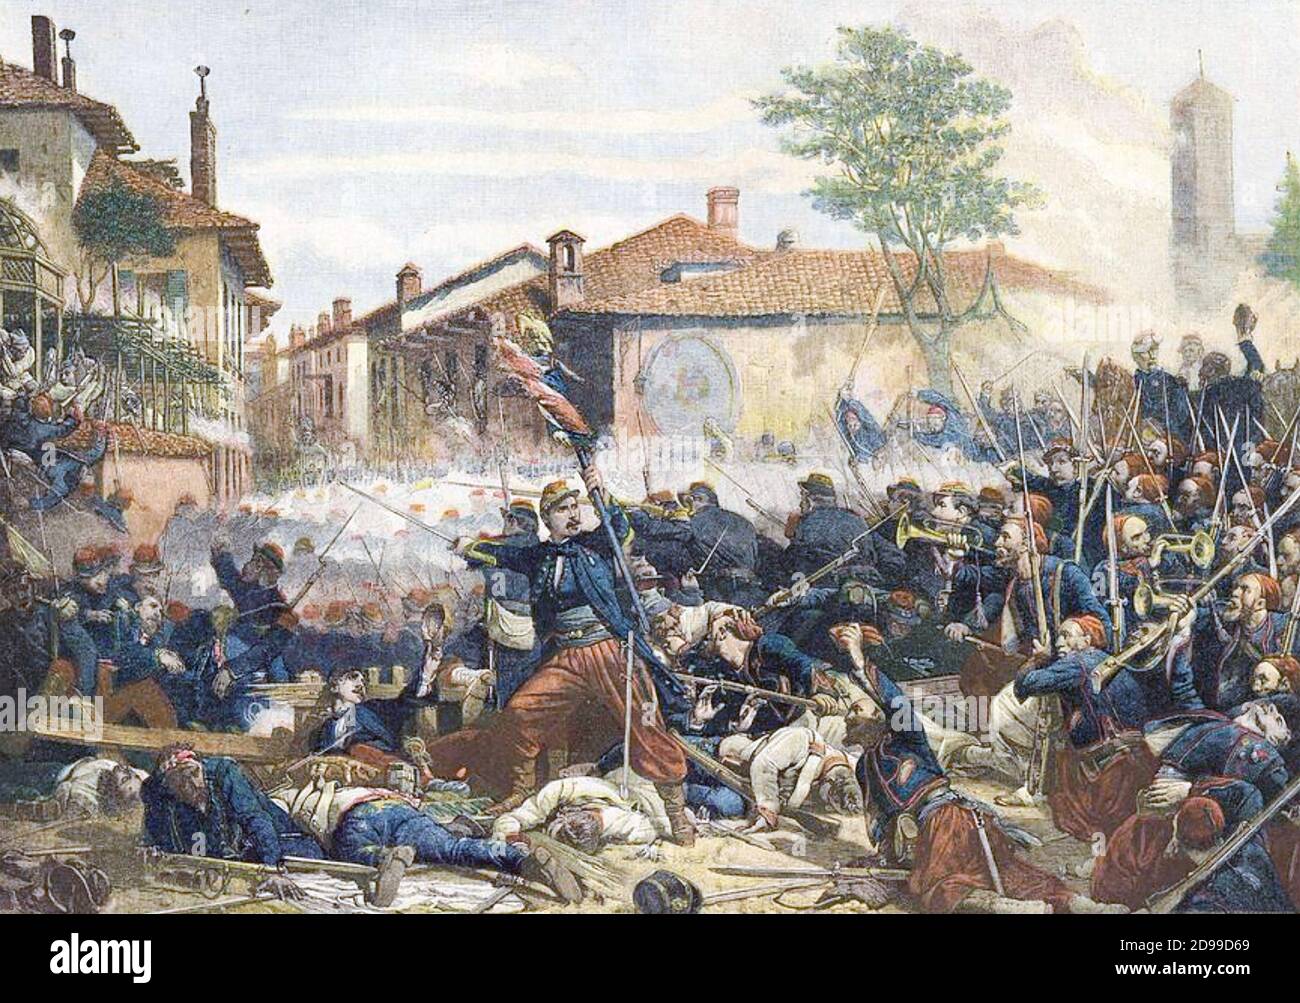 BATTLE OF MAGENTA 4 June 1859. Combined French and Sardinian forces defeat the Austrians. Stock Photo